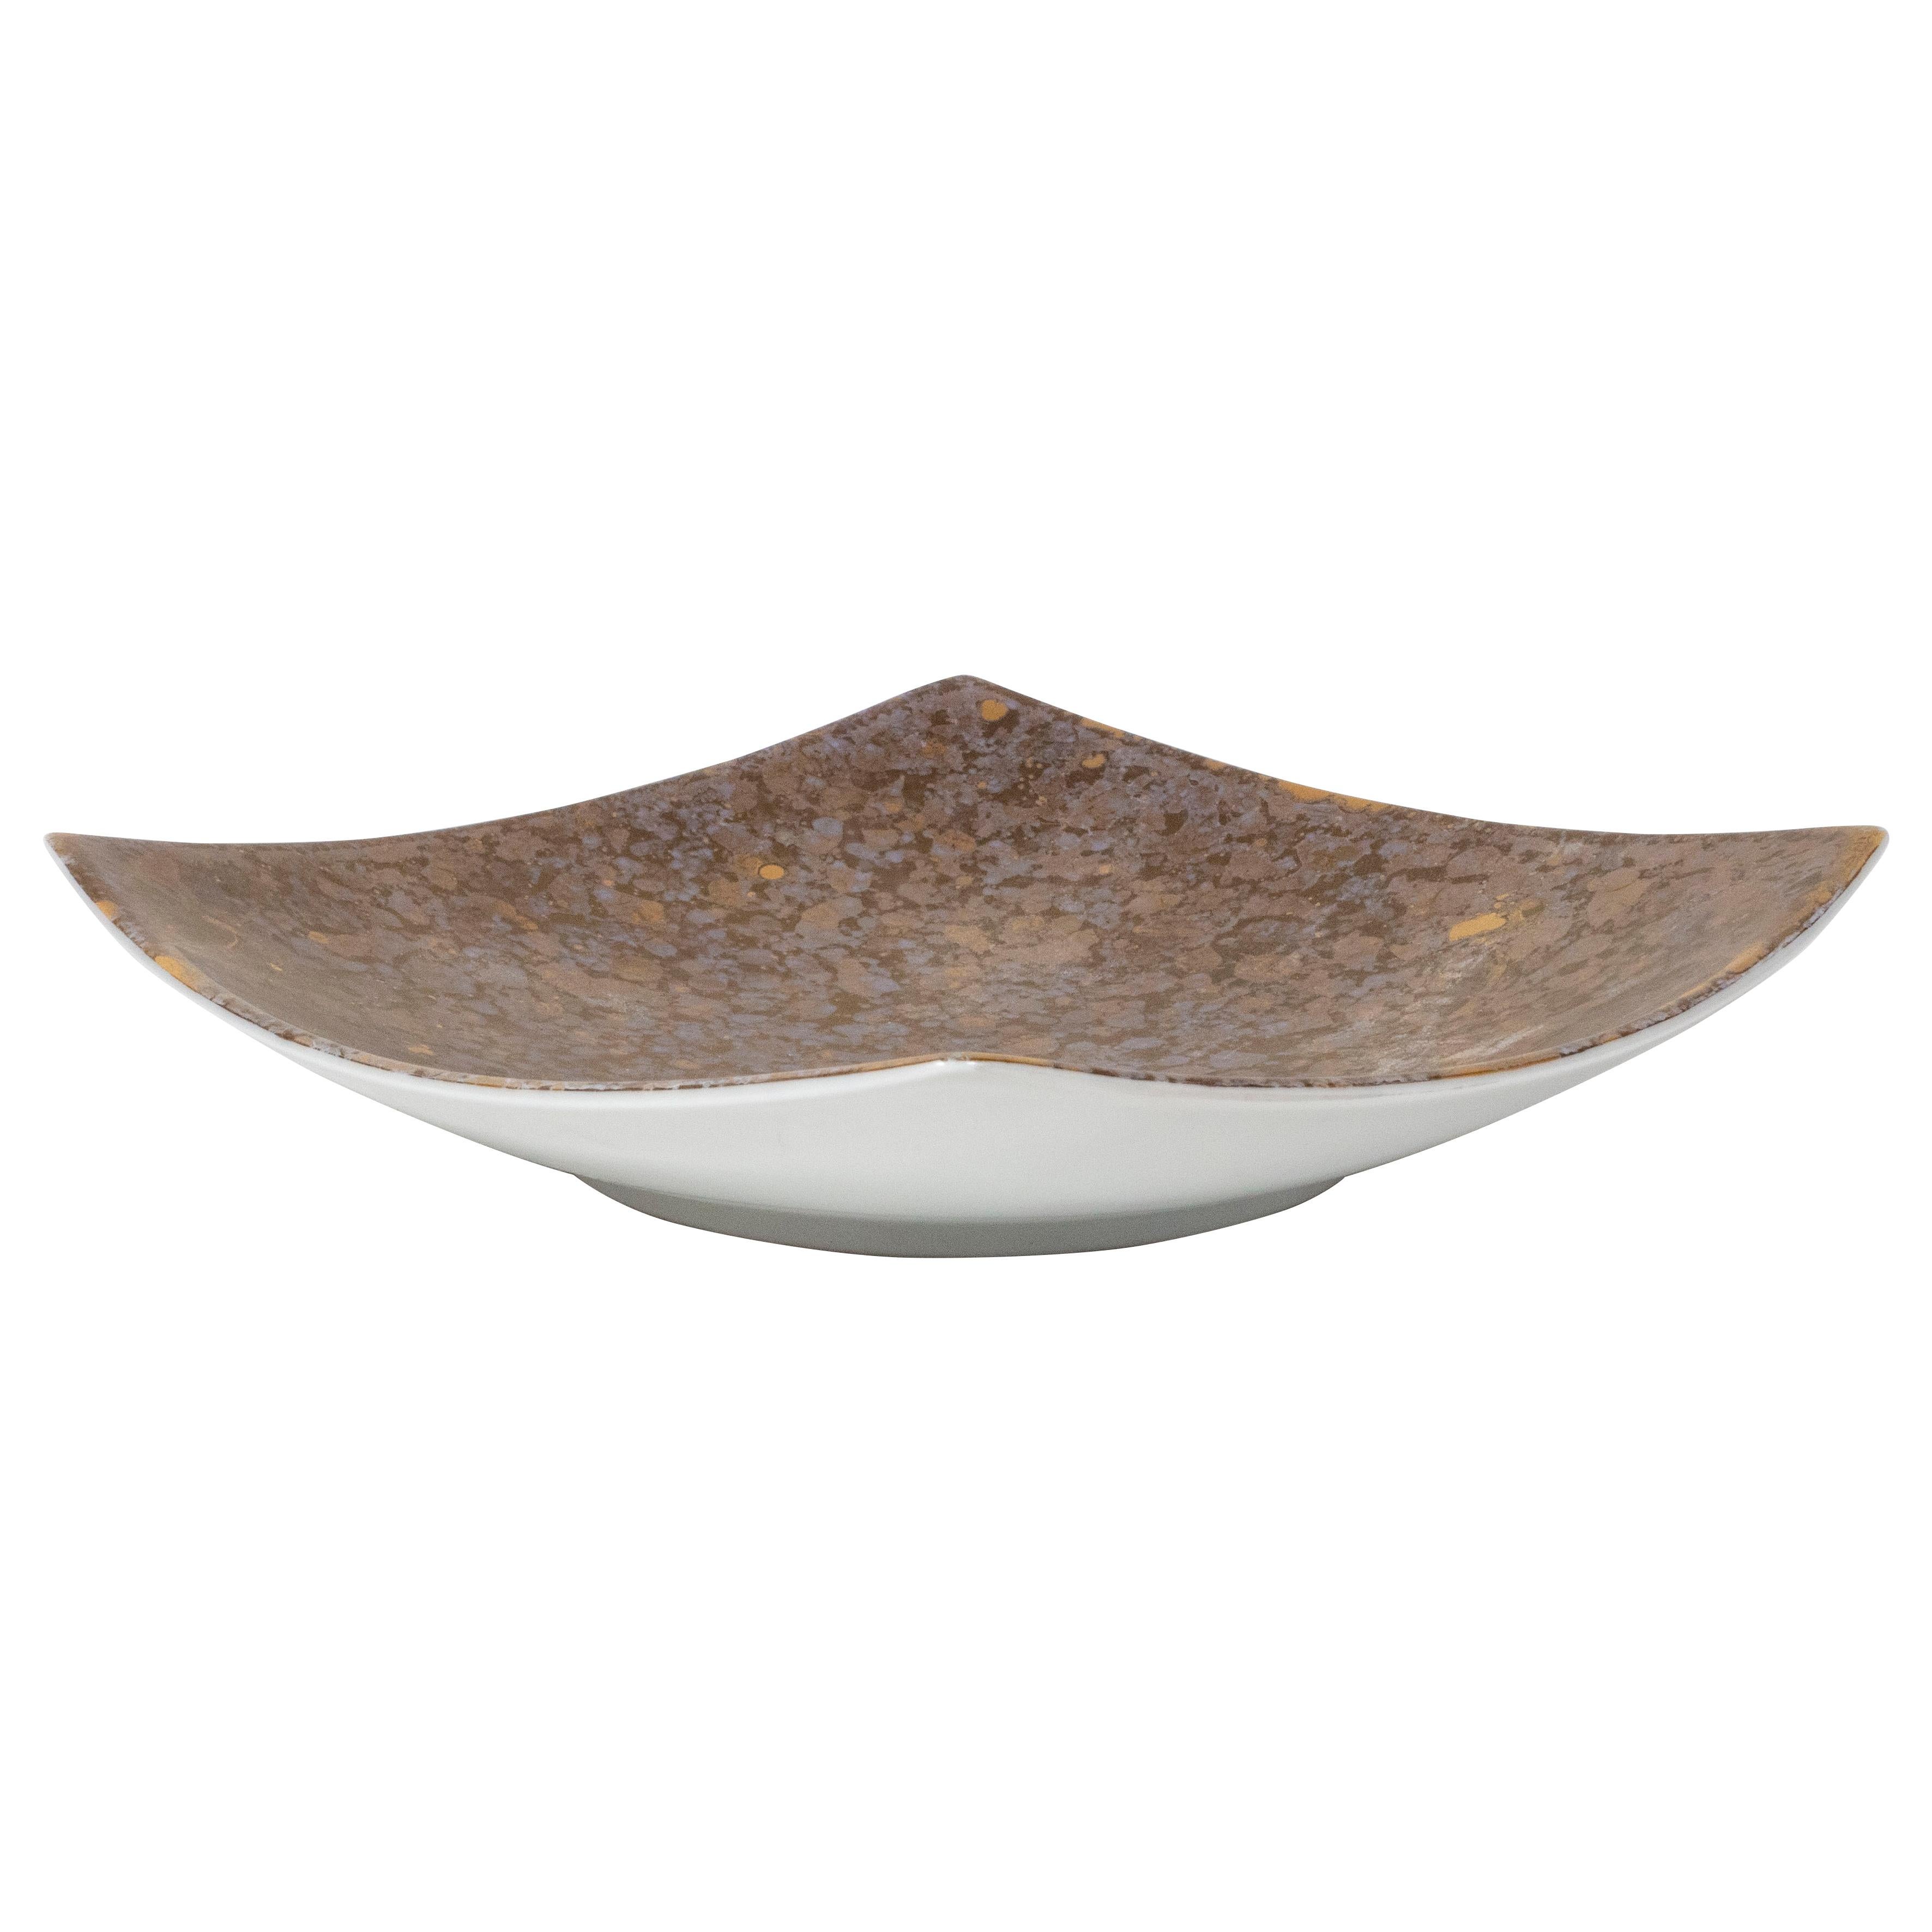 Midcentury Speckled Bronze & White Porcelain Decorative Dish by Rosenthal In Excellent Condition For Sale In New York, NY